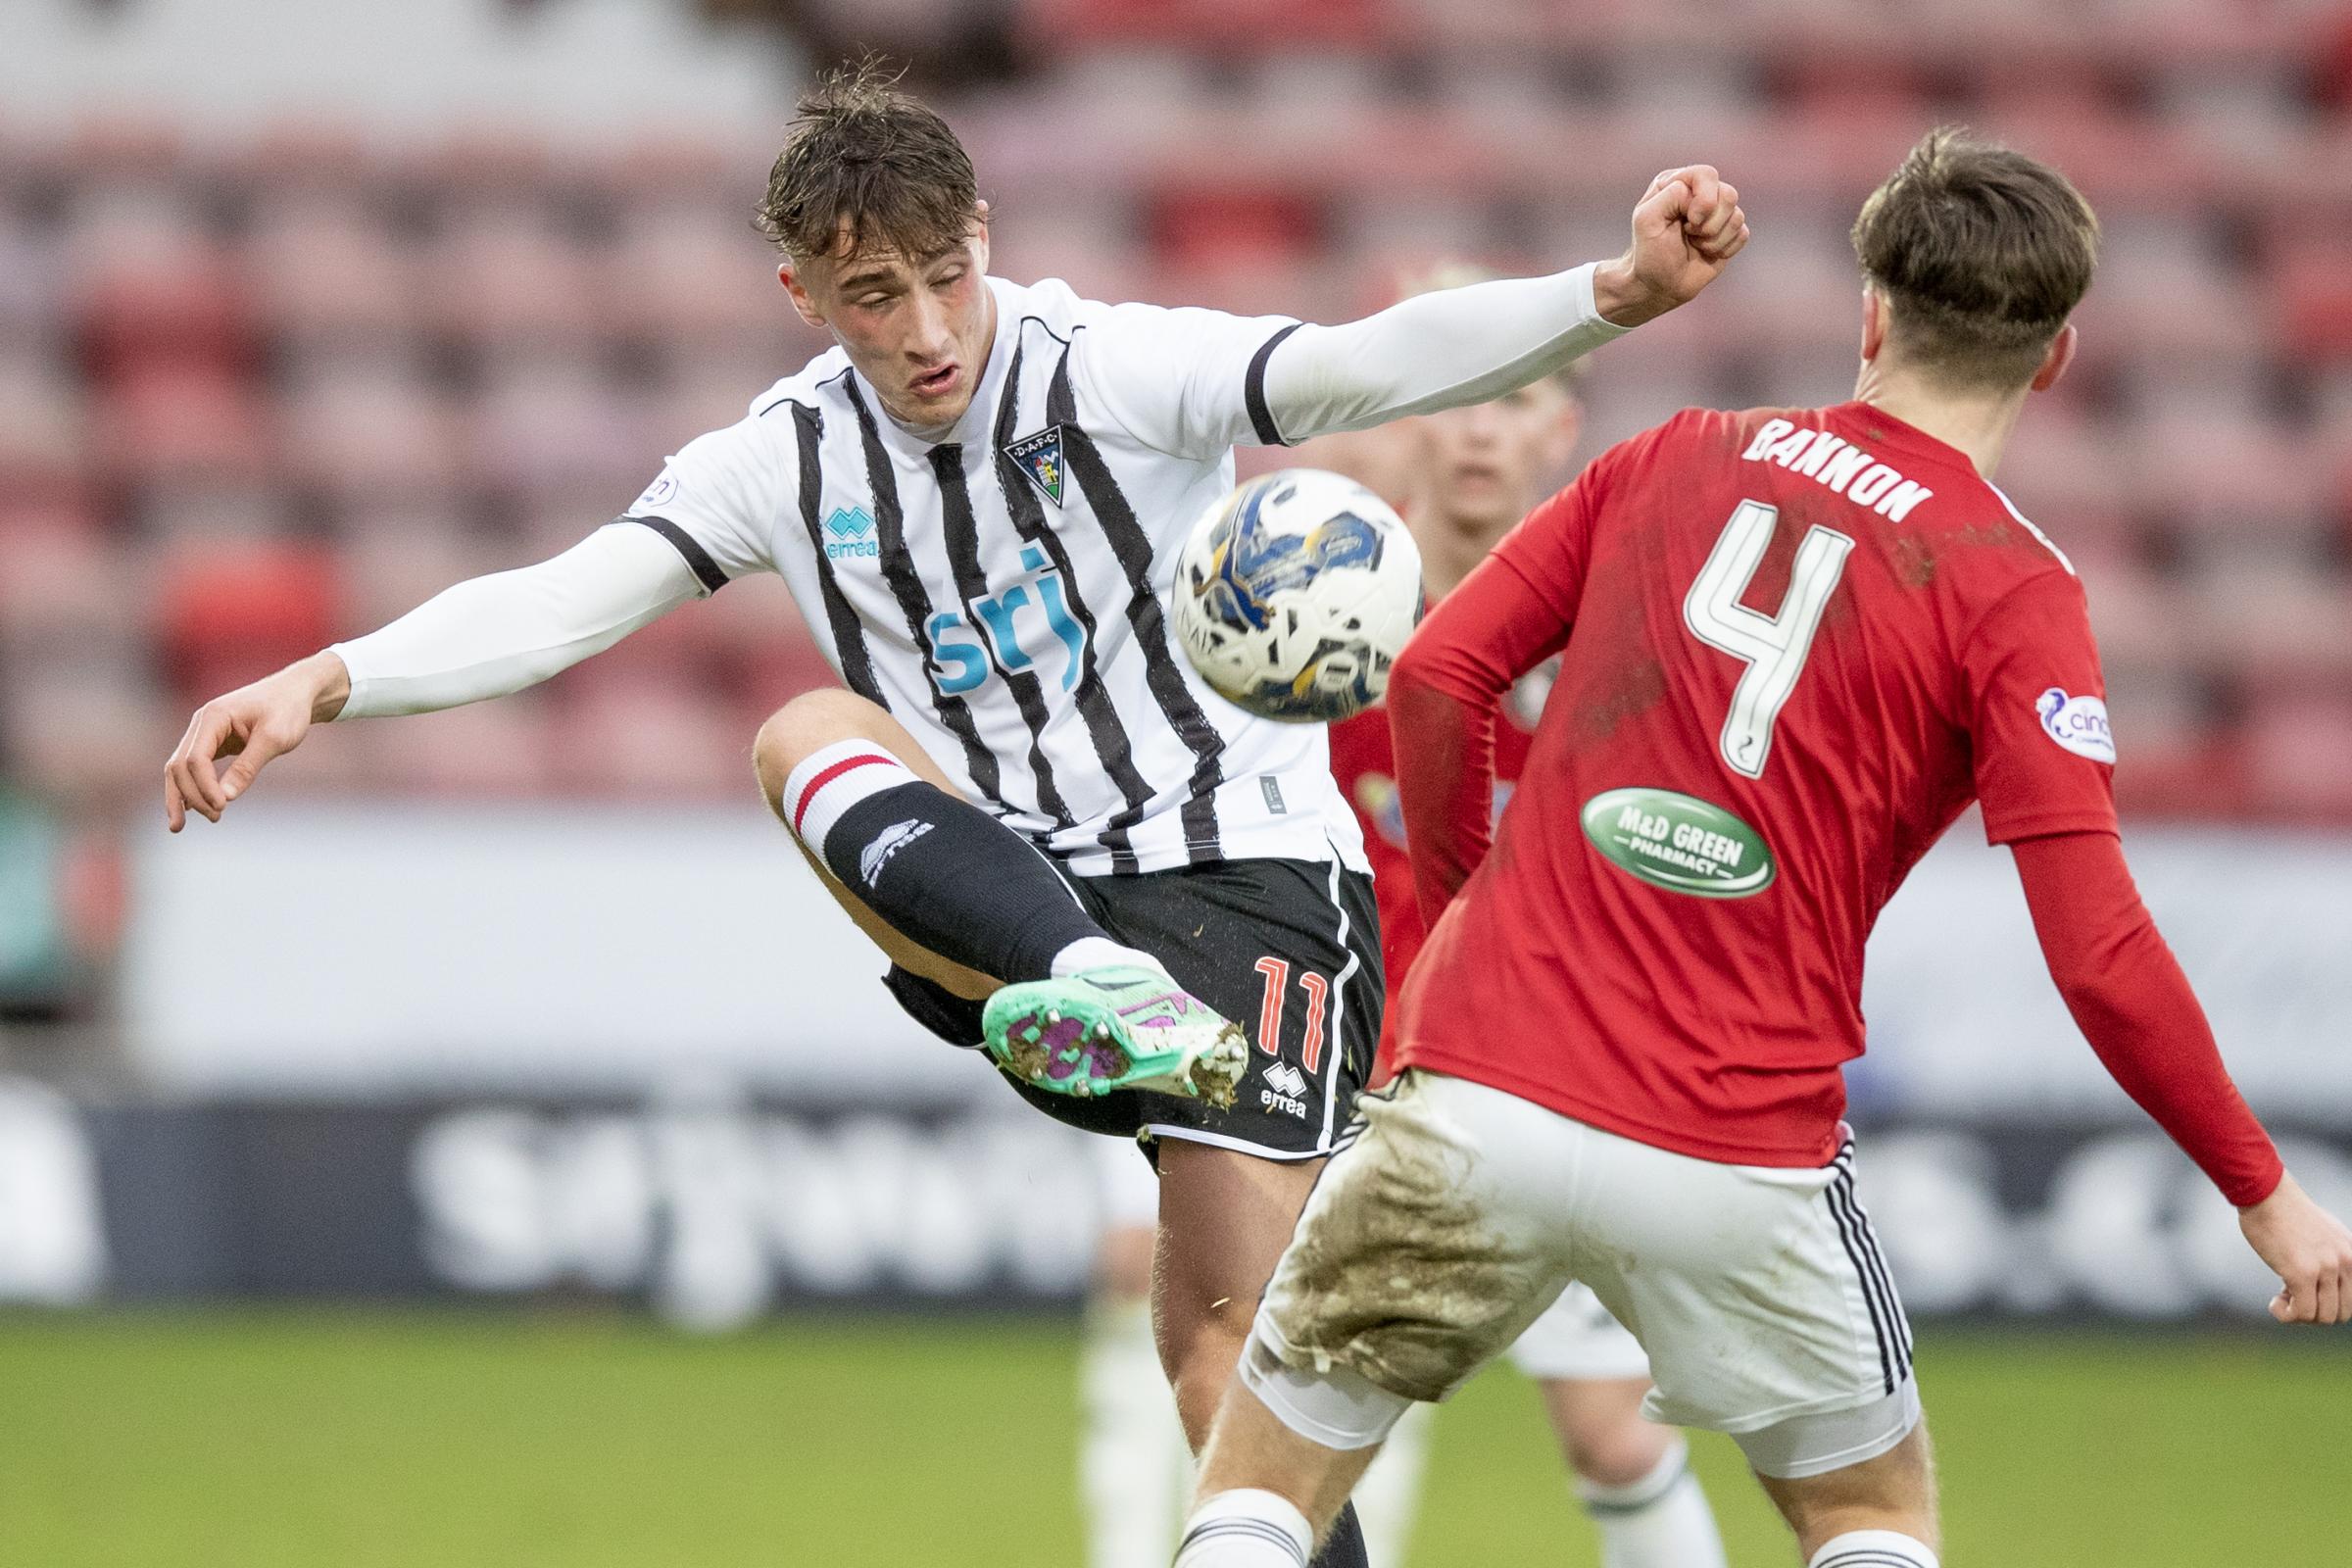 Dunfermline v Queen's Park: Pars lose to Spiders in SPFL Championship